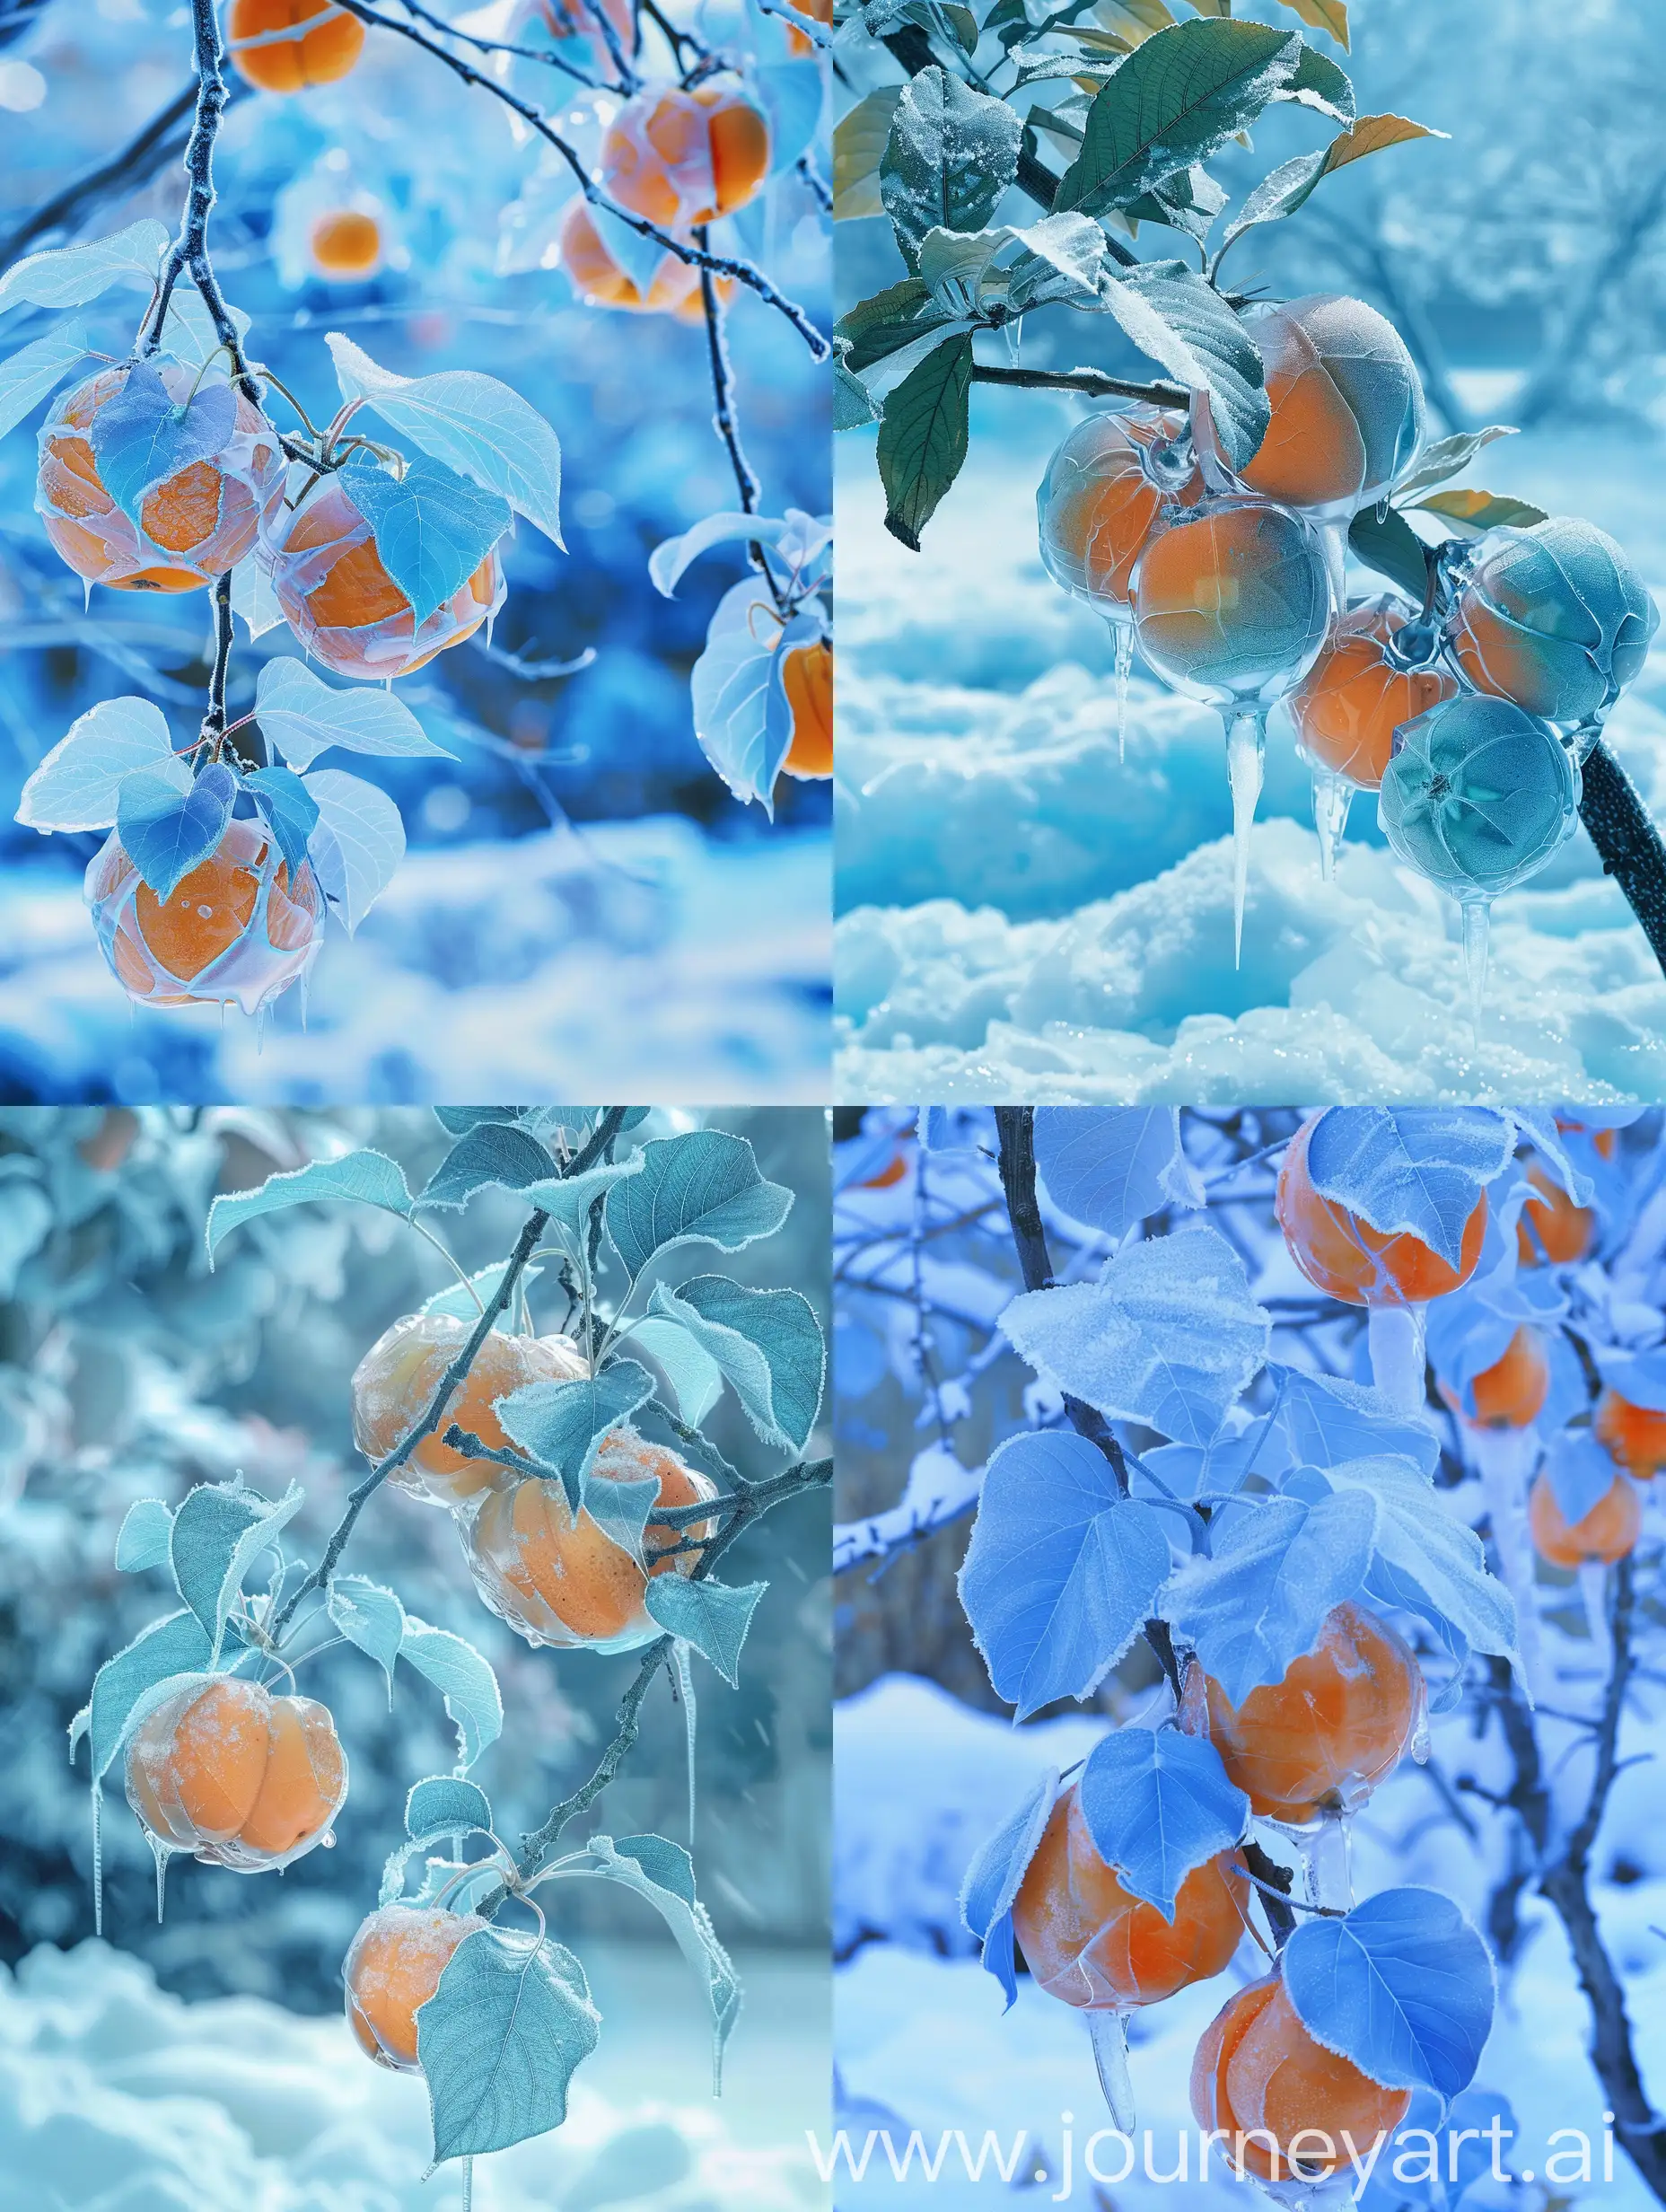 Winter-Scene-with-Frozen-Persimmons-Hanging-on-Tree